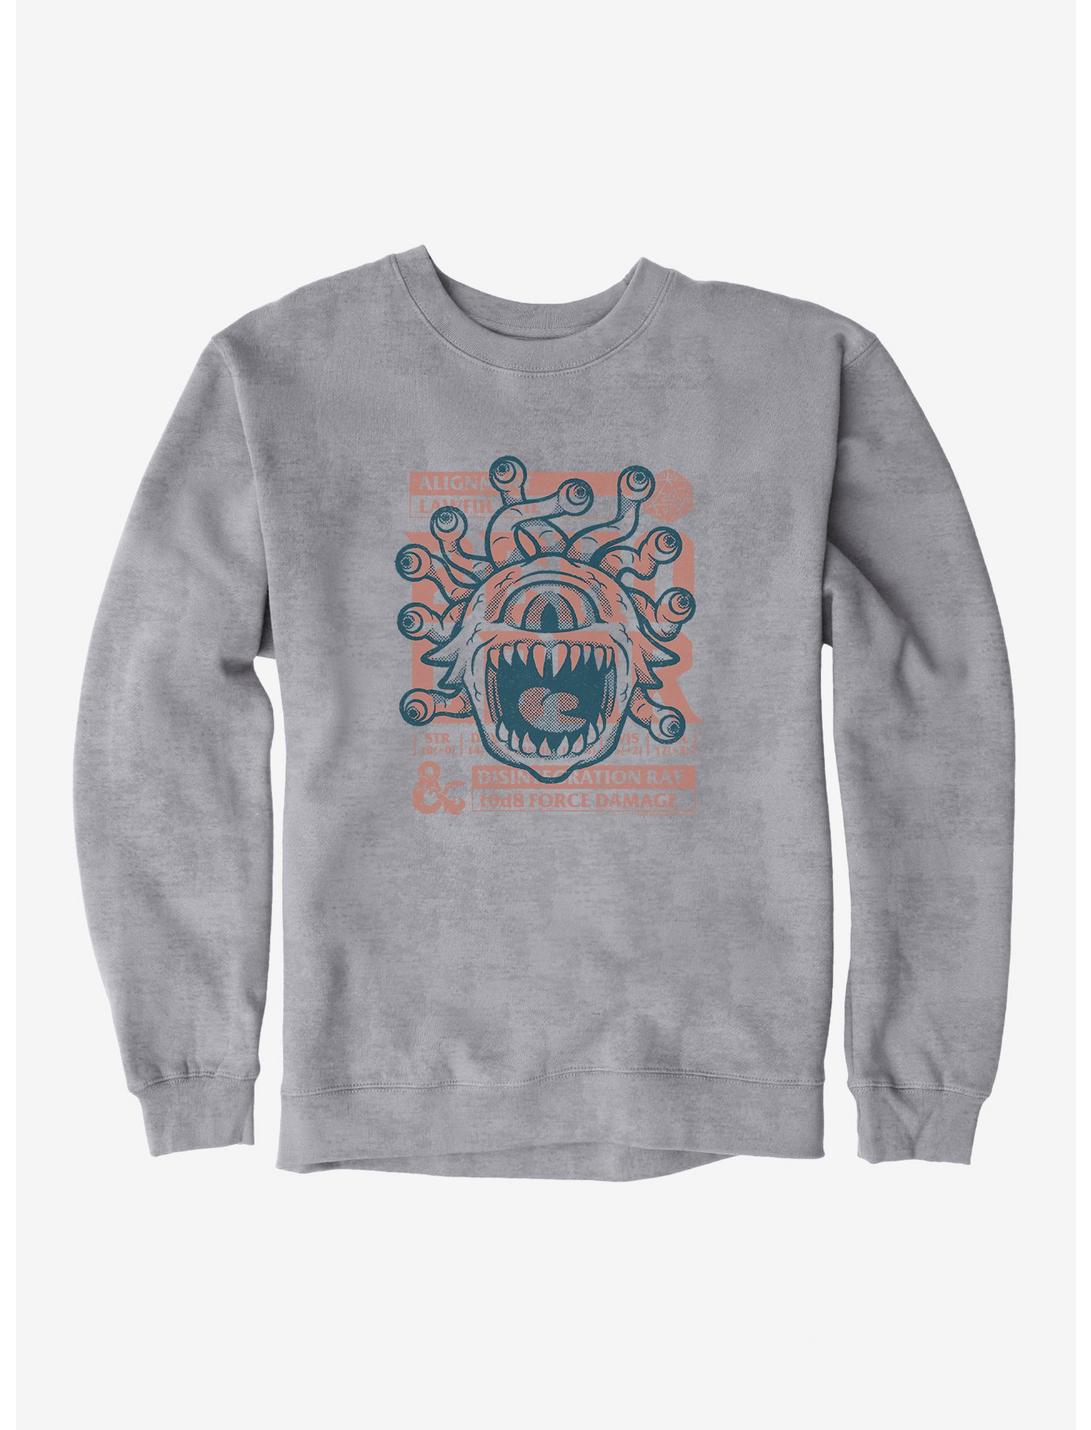 Dungeons & Dragons Disentegration Ray Retro Competition Cards Sweatshirt, HEATHER GREY, hi-res